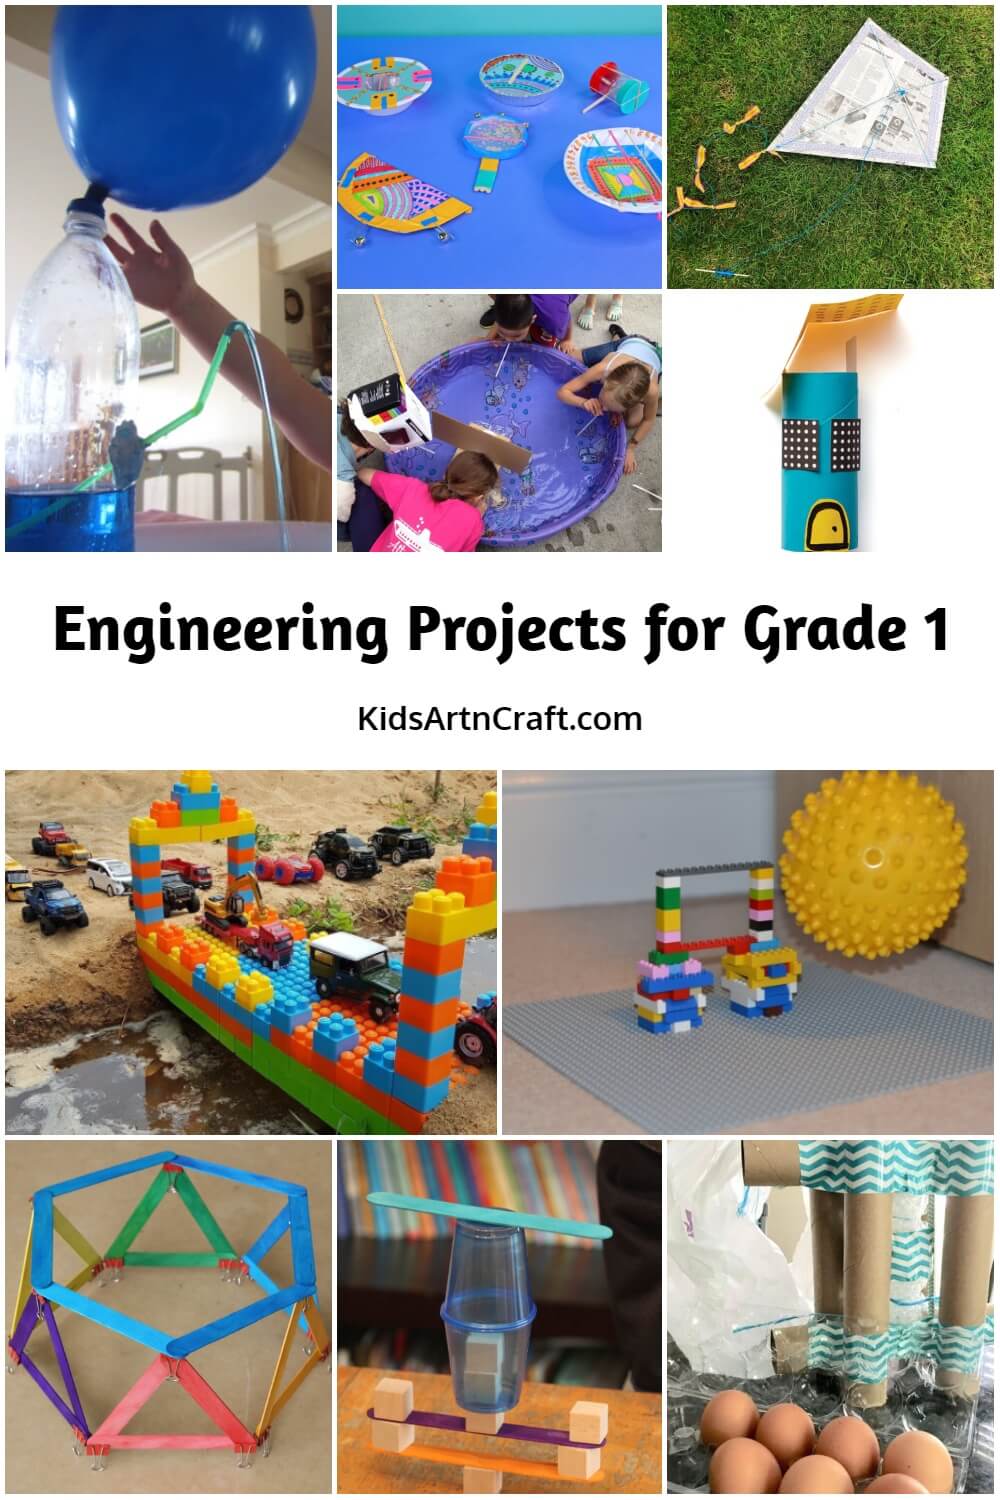 Engineering Projects for Grade 1